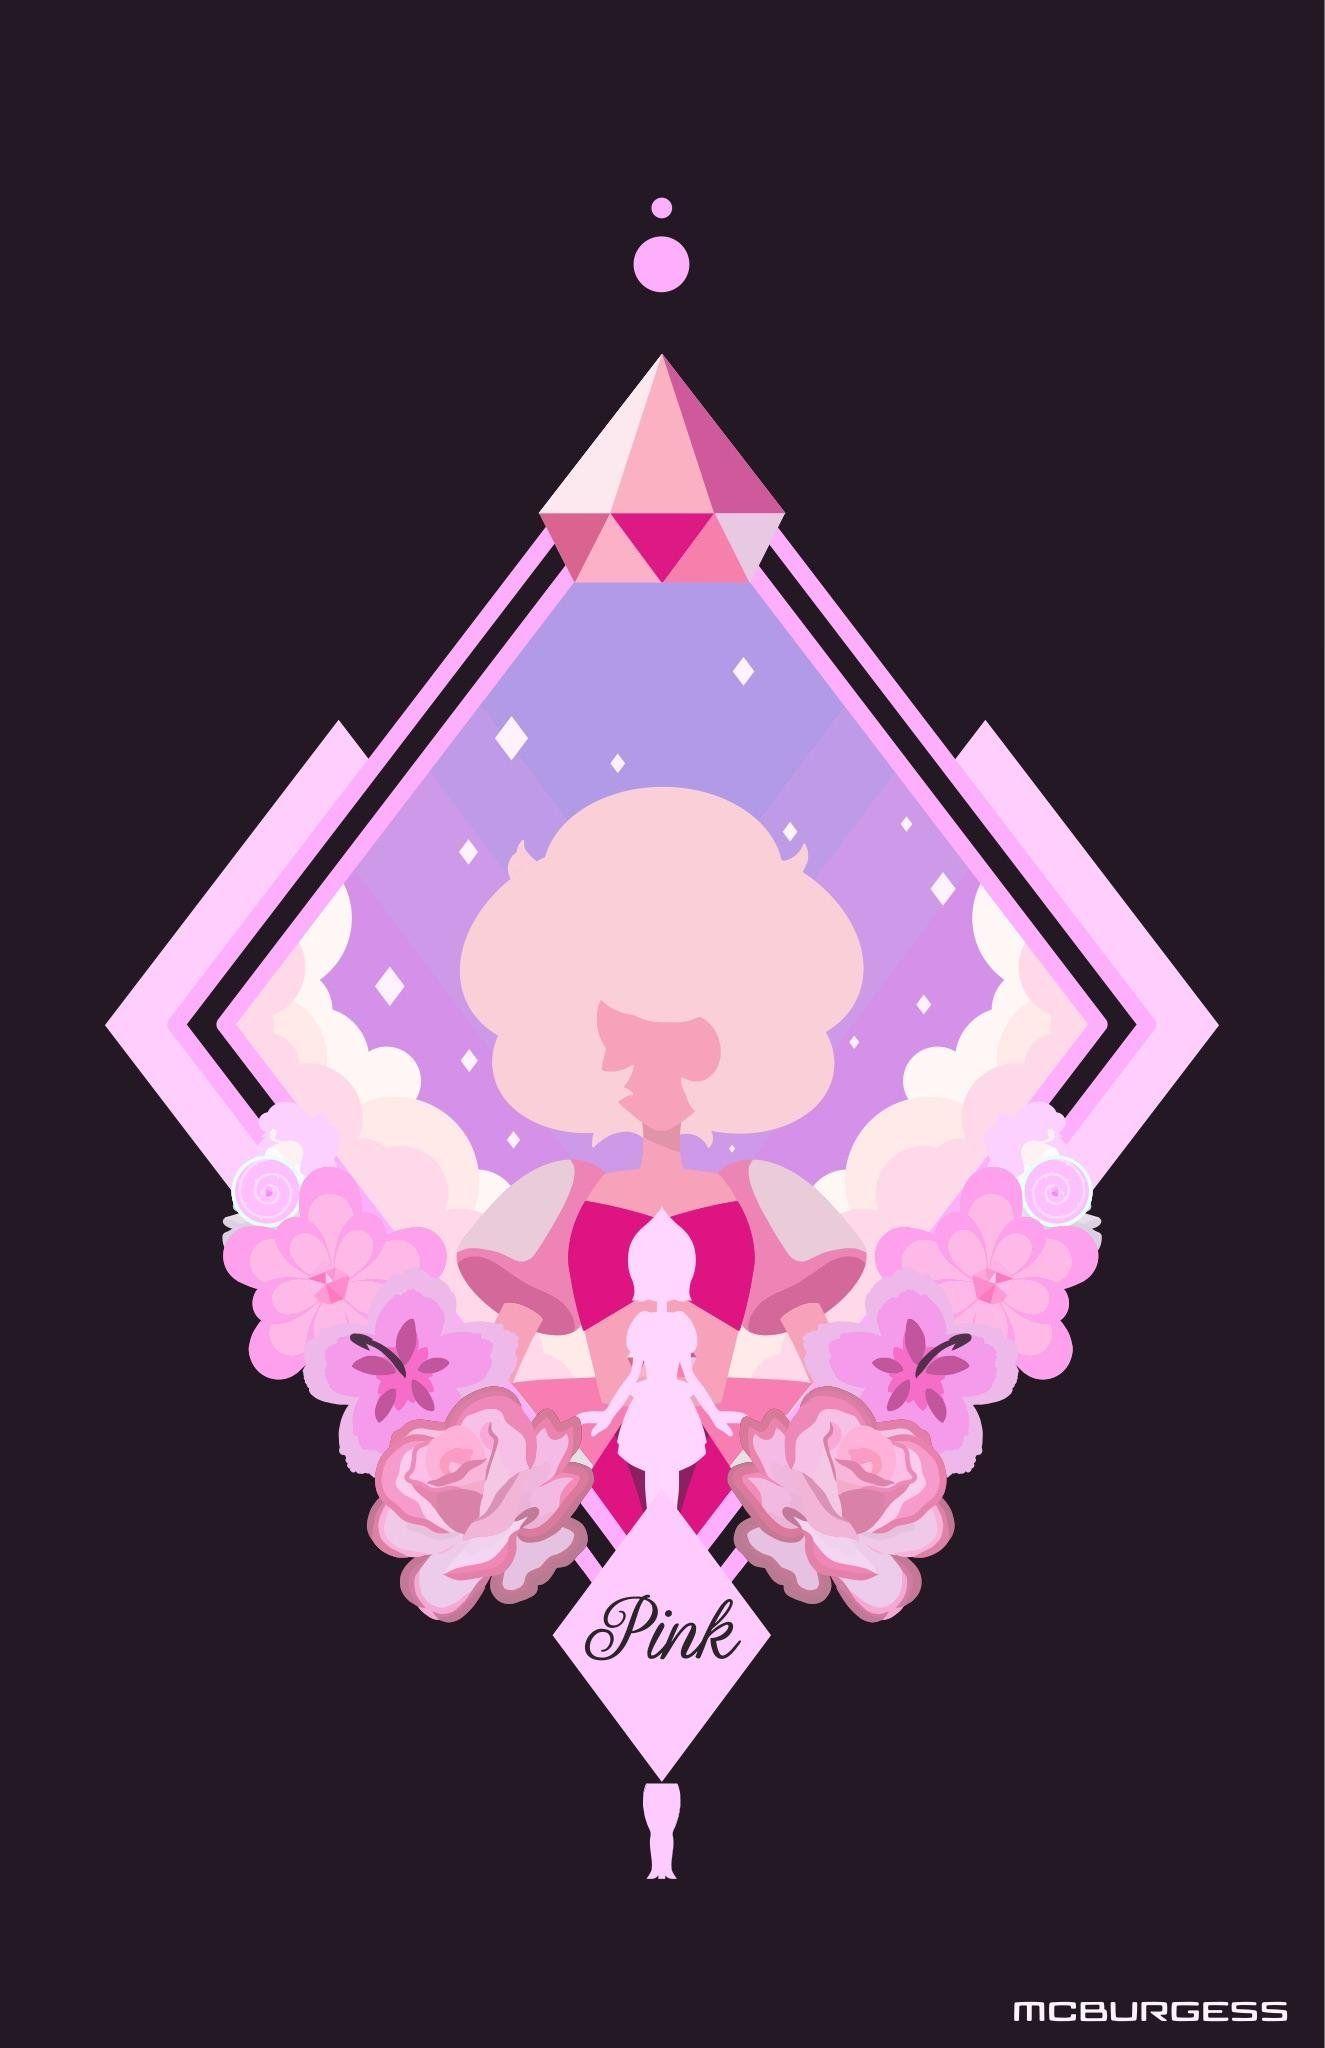 Enjoy The Beauty Of The Universe With Pink Steven Universe Backgrounds